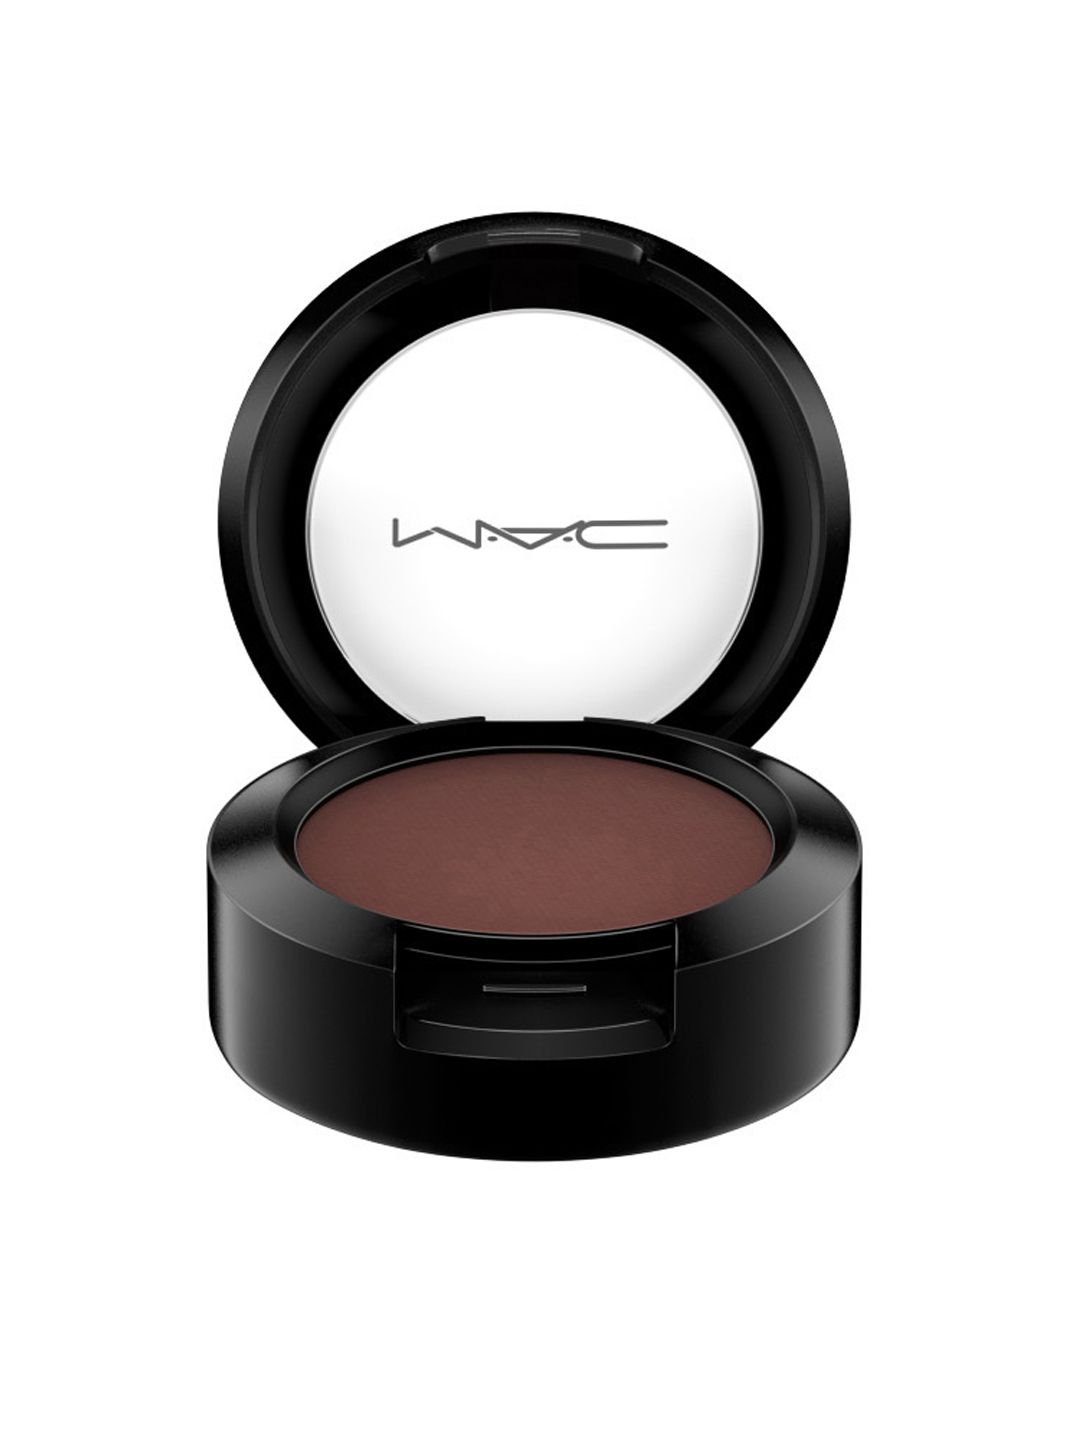 M.A.C Eye Shadow - Embark 1.3g Price in India